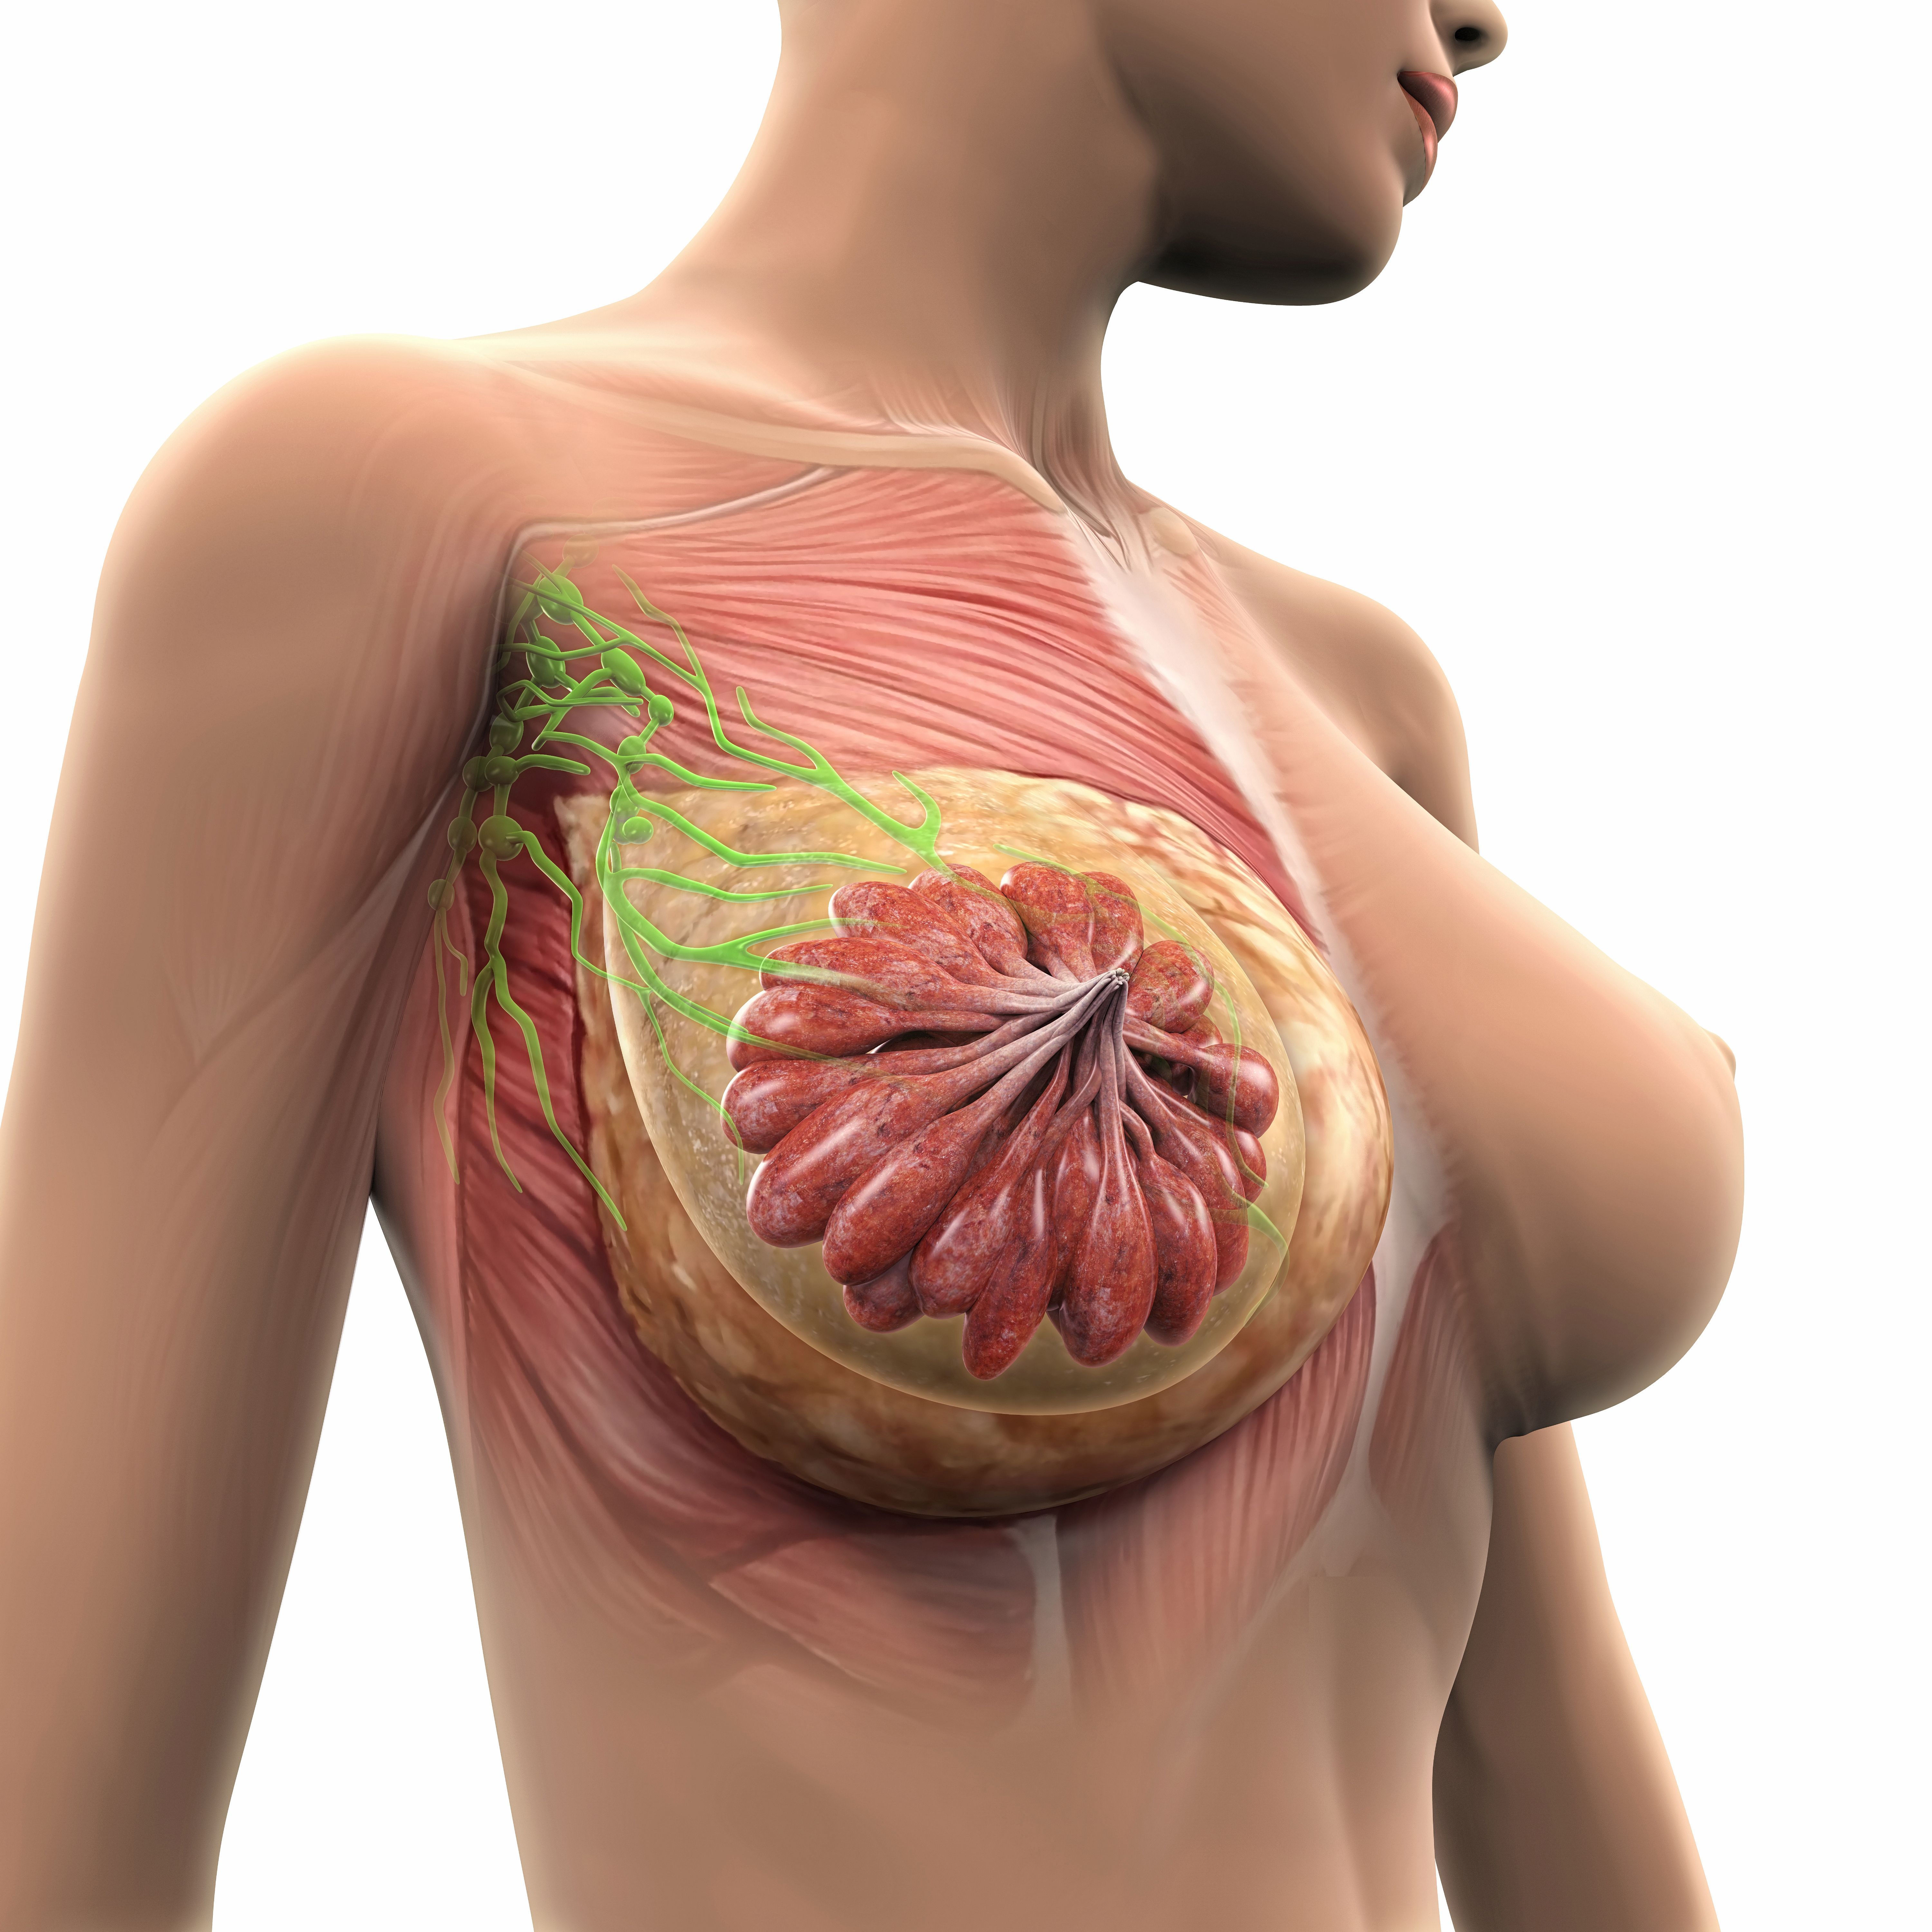 Breast Cysts Vs Cancer - What Are They?